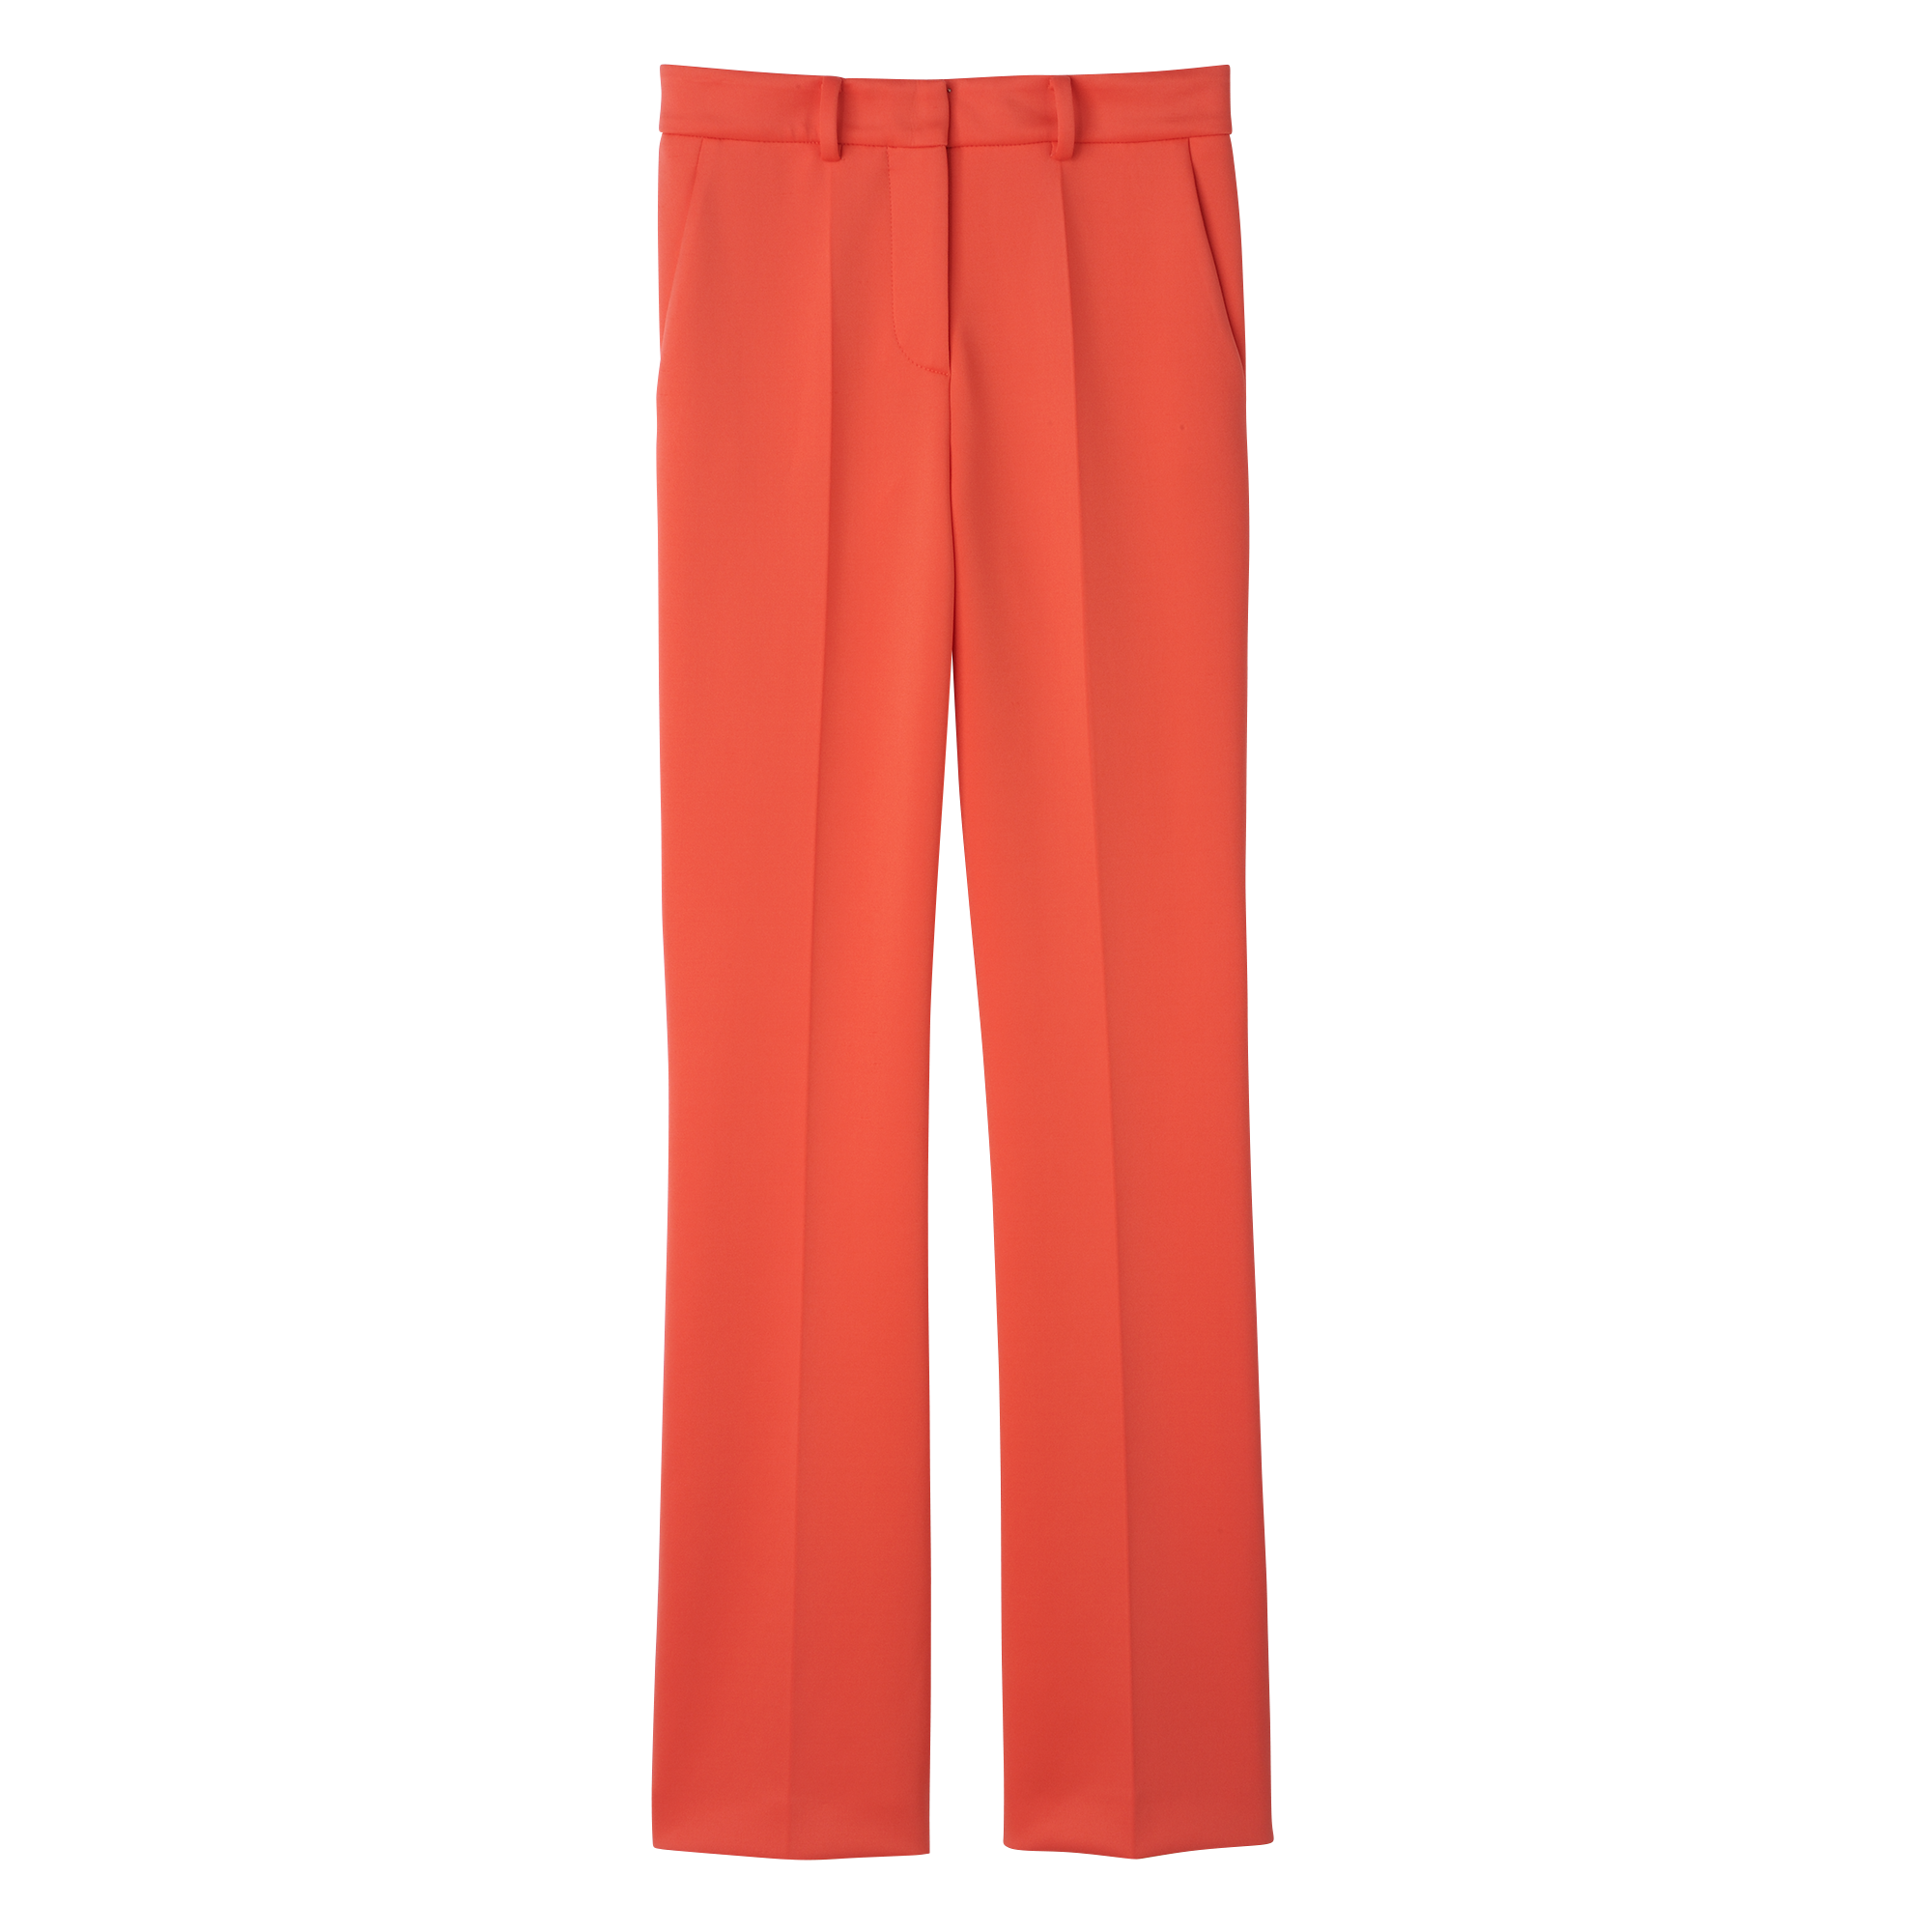 null Trousers, Strawberry